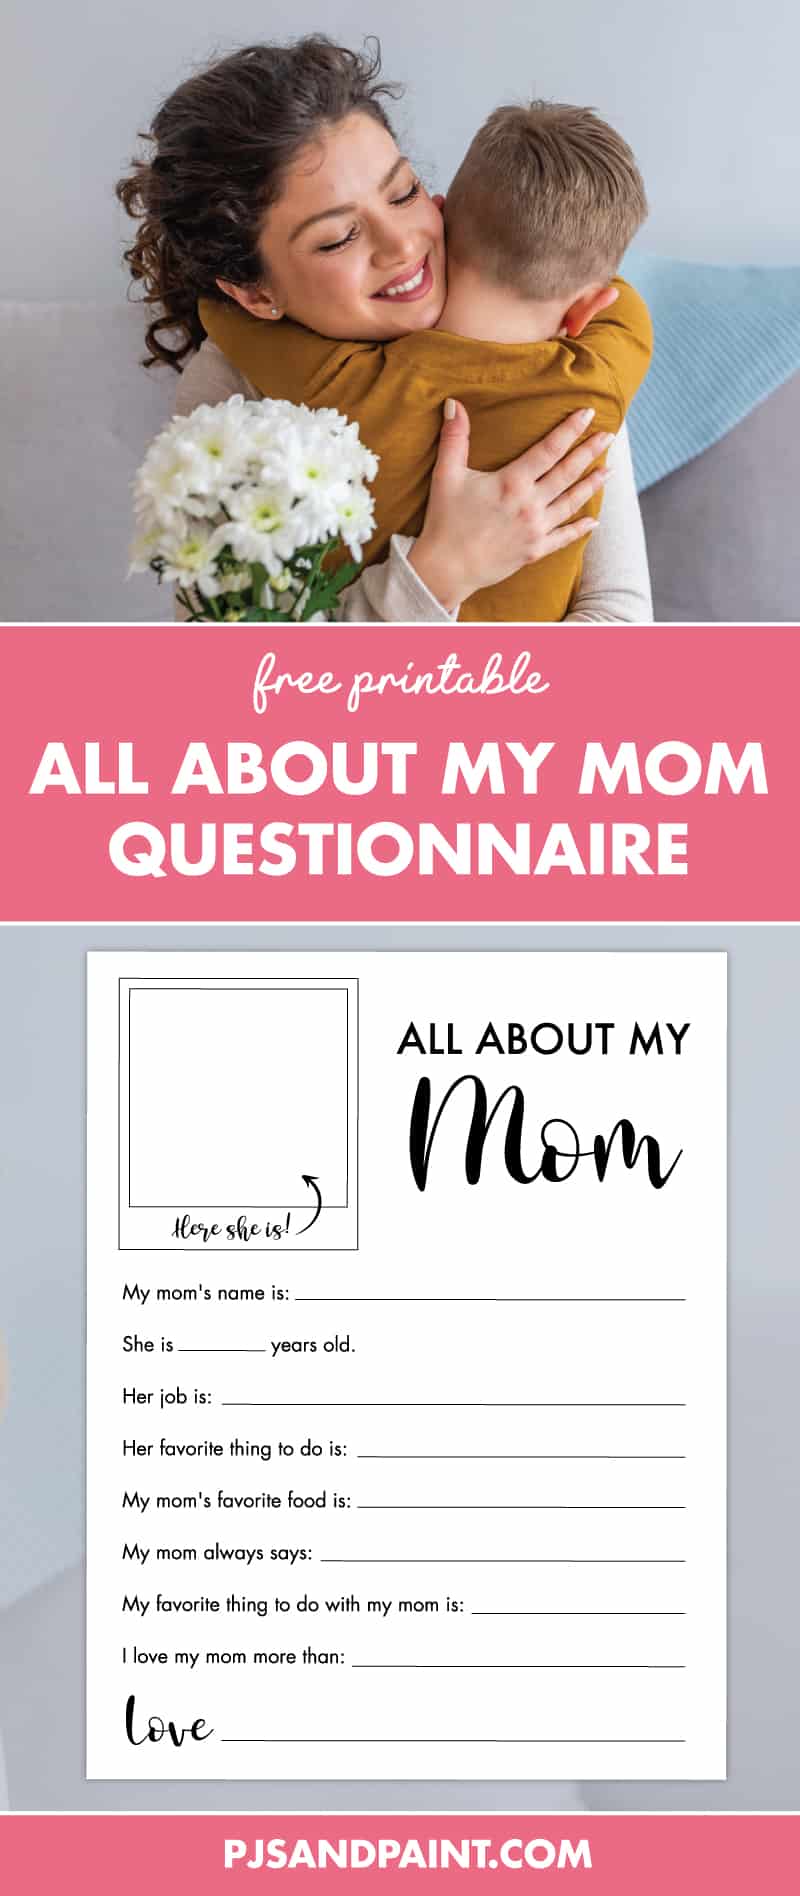 all about my mom questionnaire